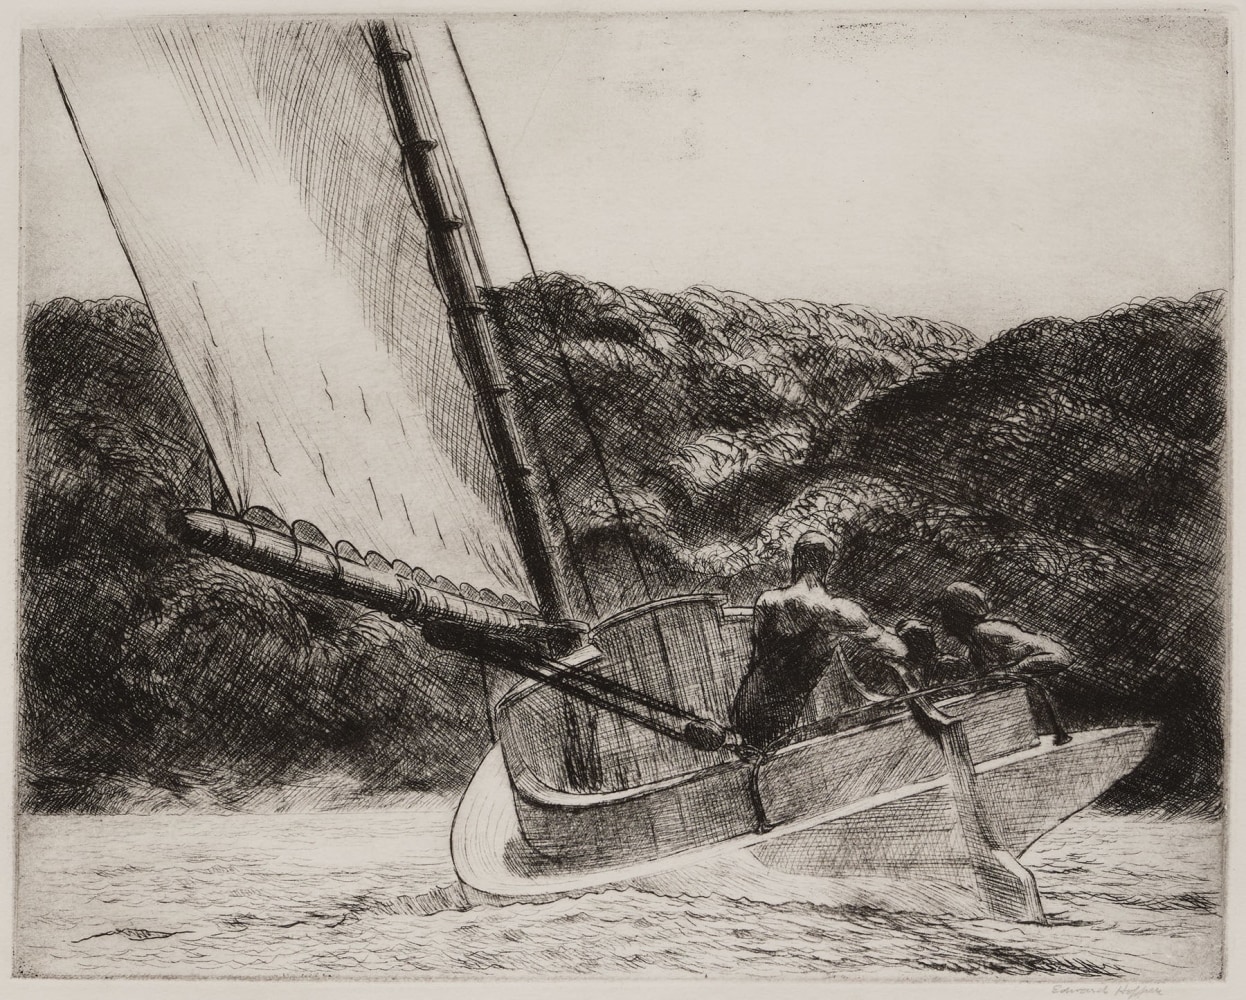 Edward Hopper&amp;nbsp;(1882-1967)&amp;nbsp;

The Cat Boat,&amp;nbsp;1922

Etching

7 7/8 x 9 7/8 inches, plate

13 1/2 x 16 inches, sheet